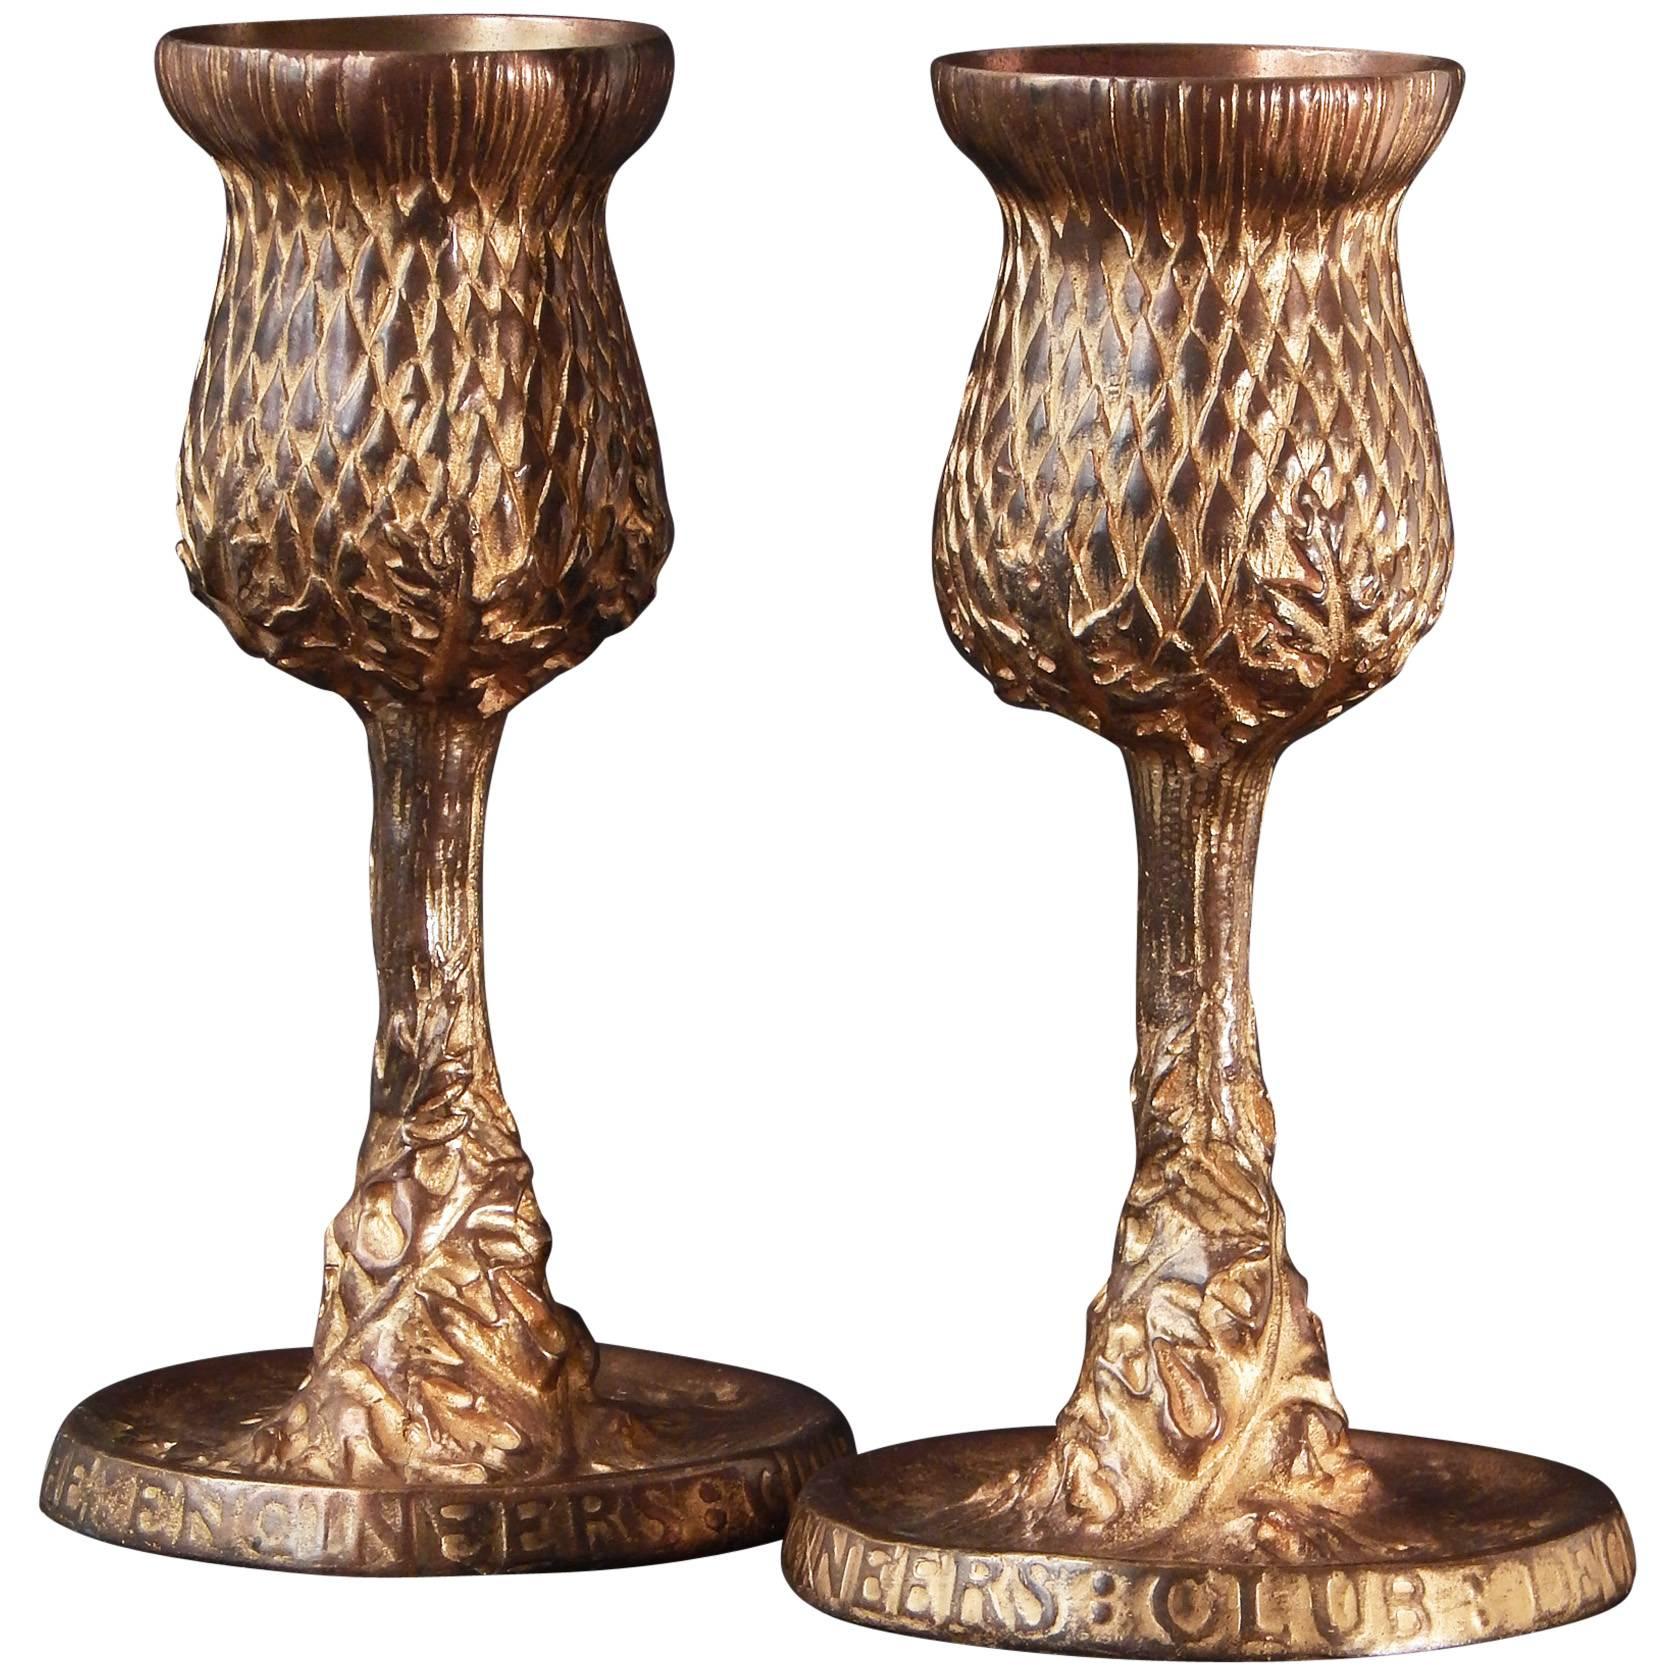 Thistle Goblets, Rare Gilded Bronze Pieces by Louis Comfort Tiffany, 1907